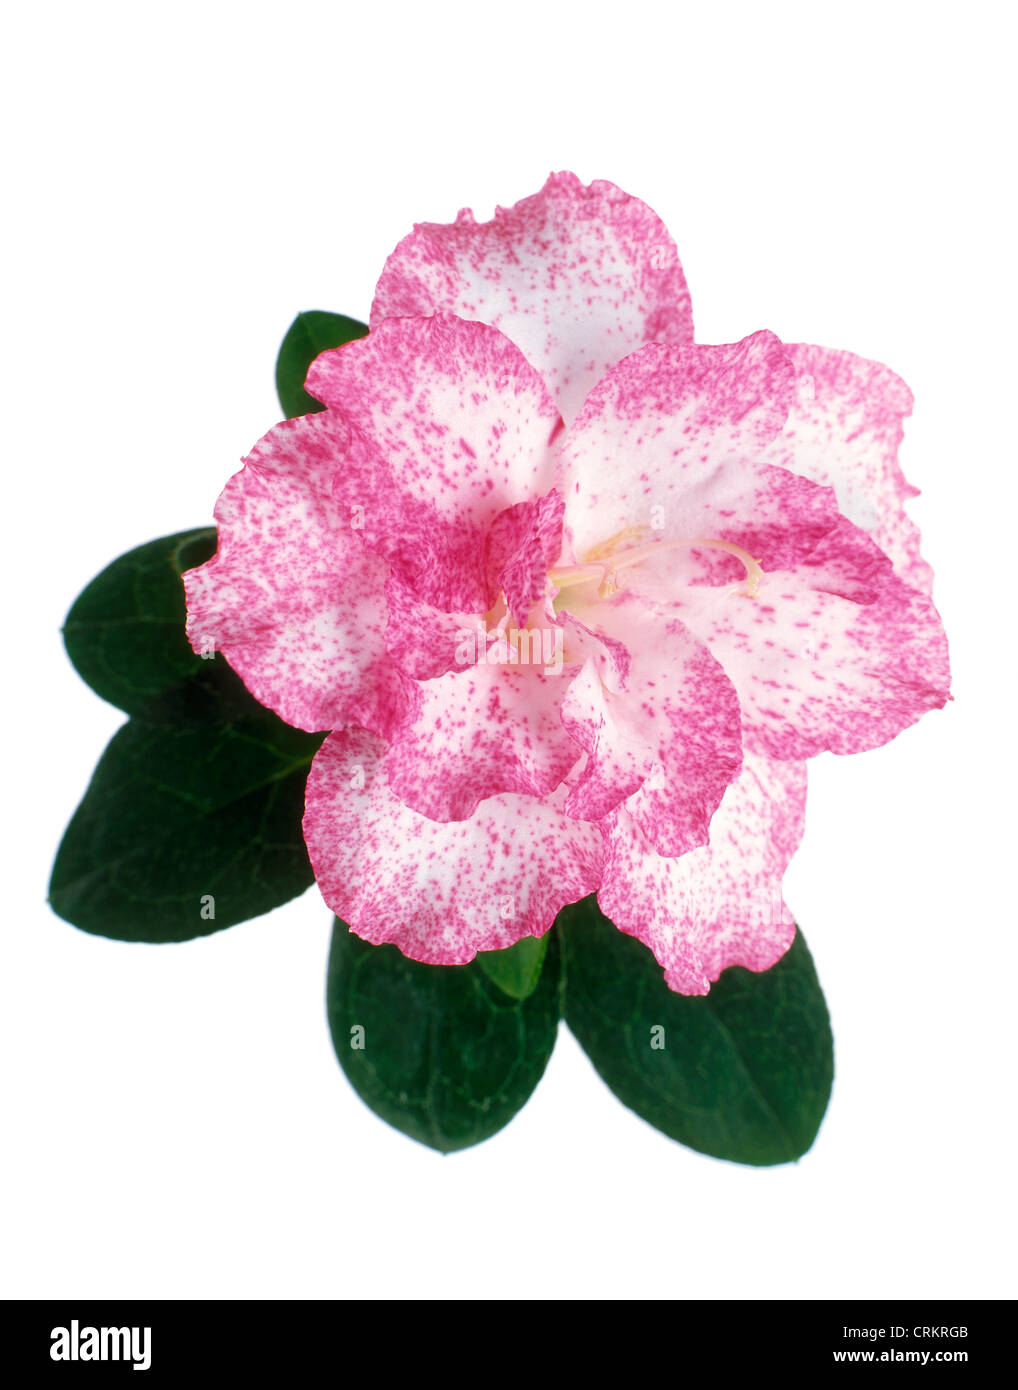 Camellia, pink and white flower with leaves against a white background. Stock Photo